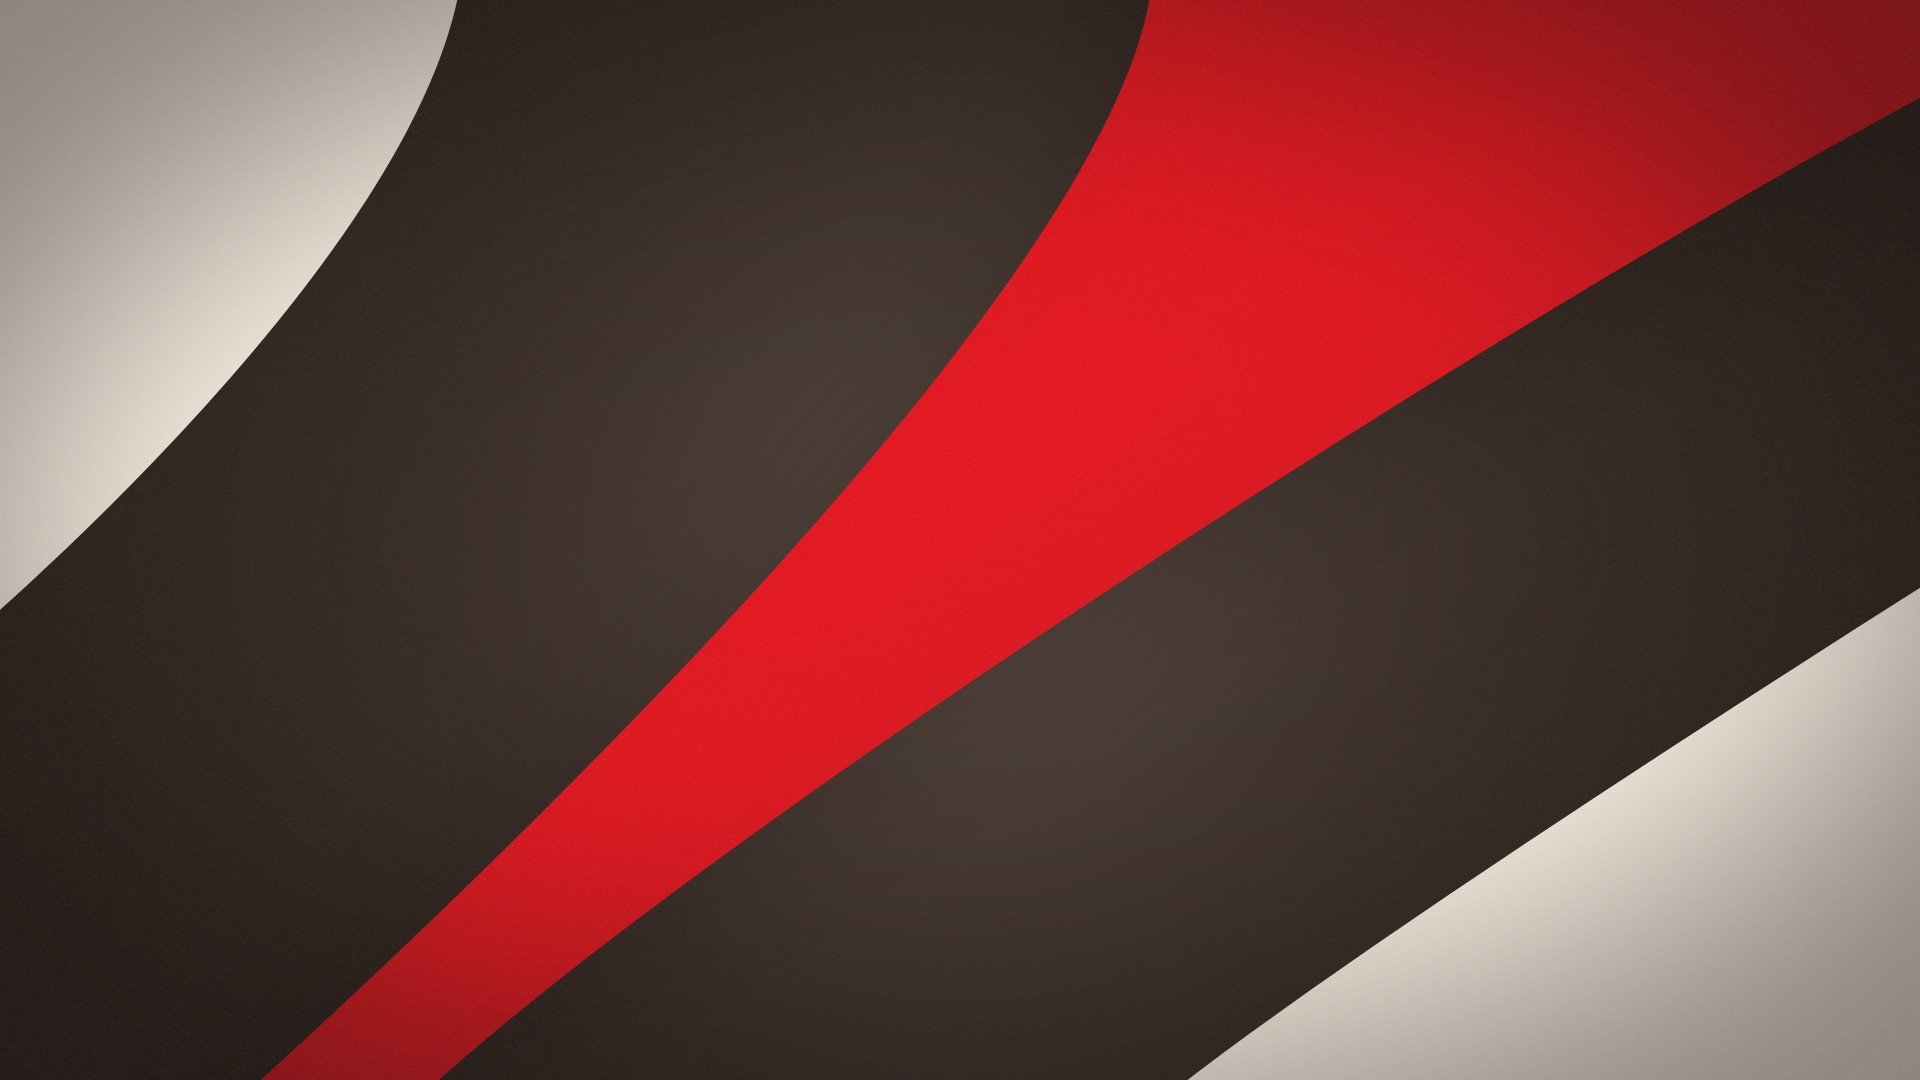 abstract, minimalistic, red, brown, calm, cherries, cappuccino, TagNotAllowedTooSubjective - desktop wallpaper